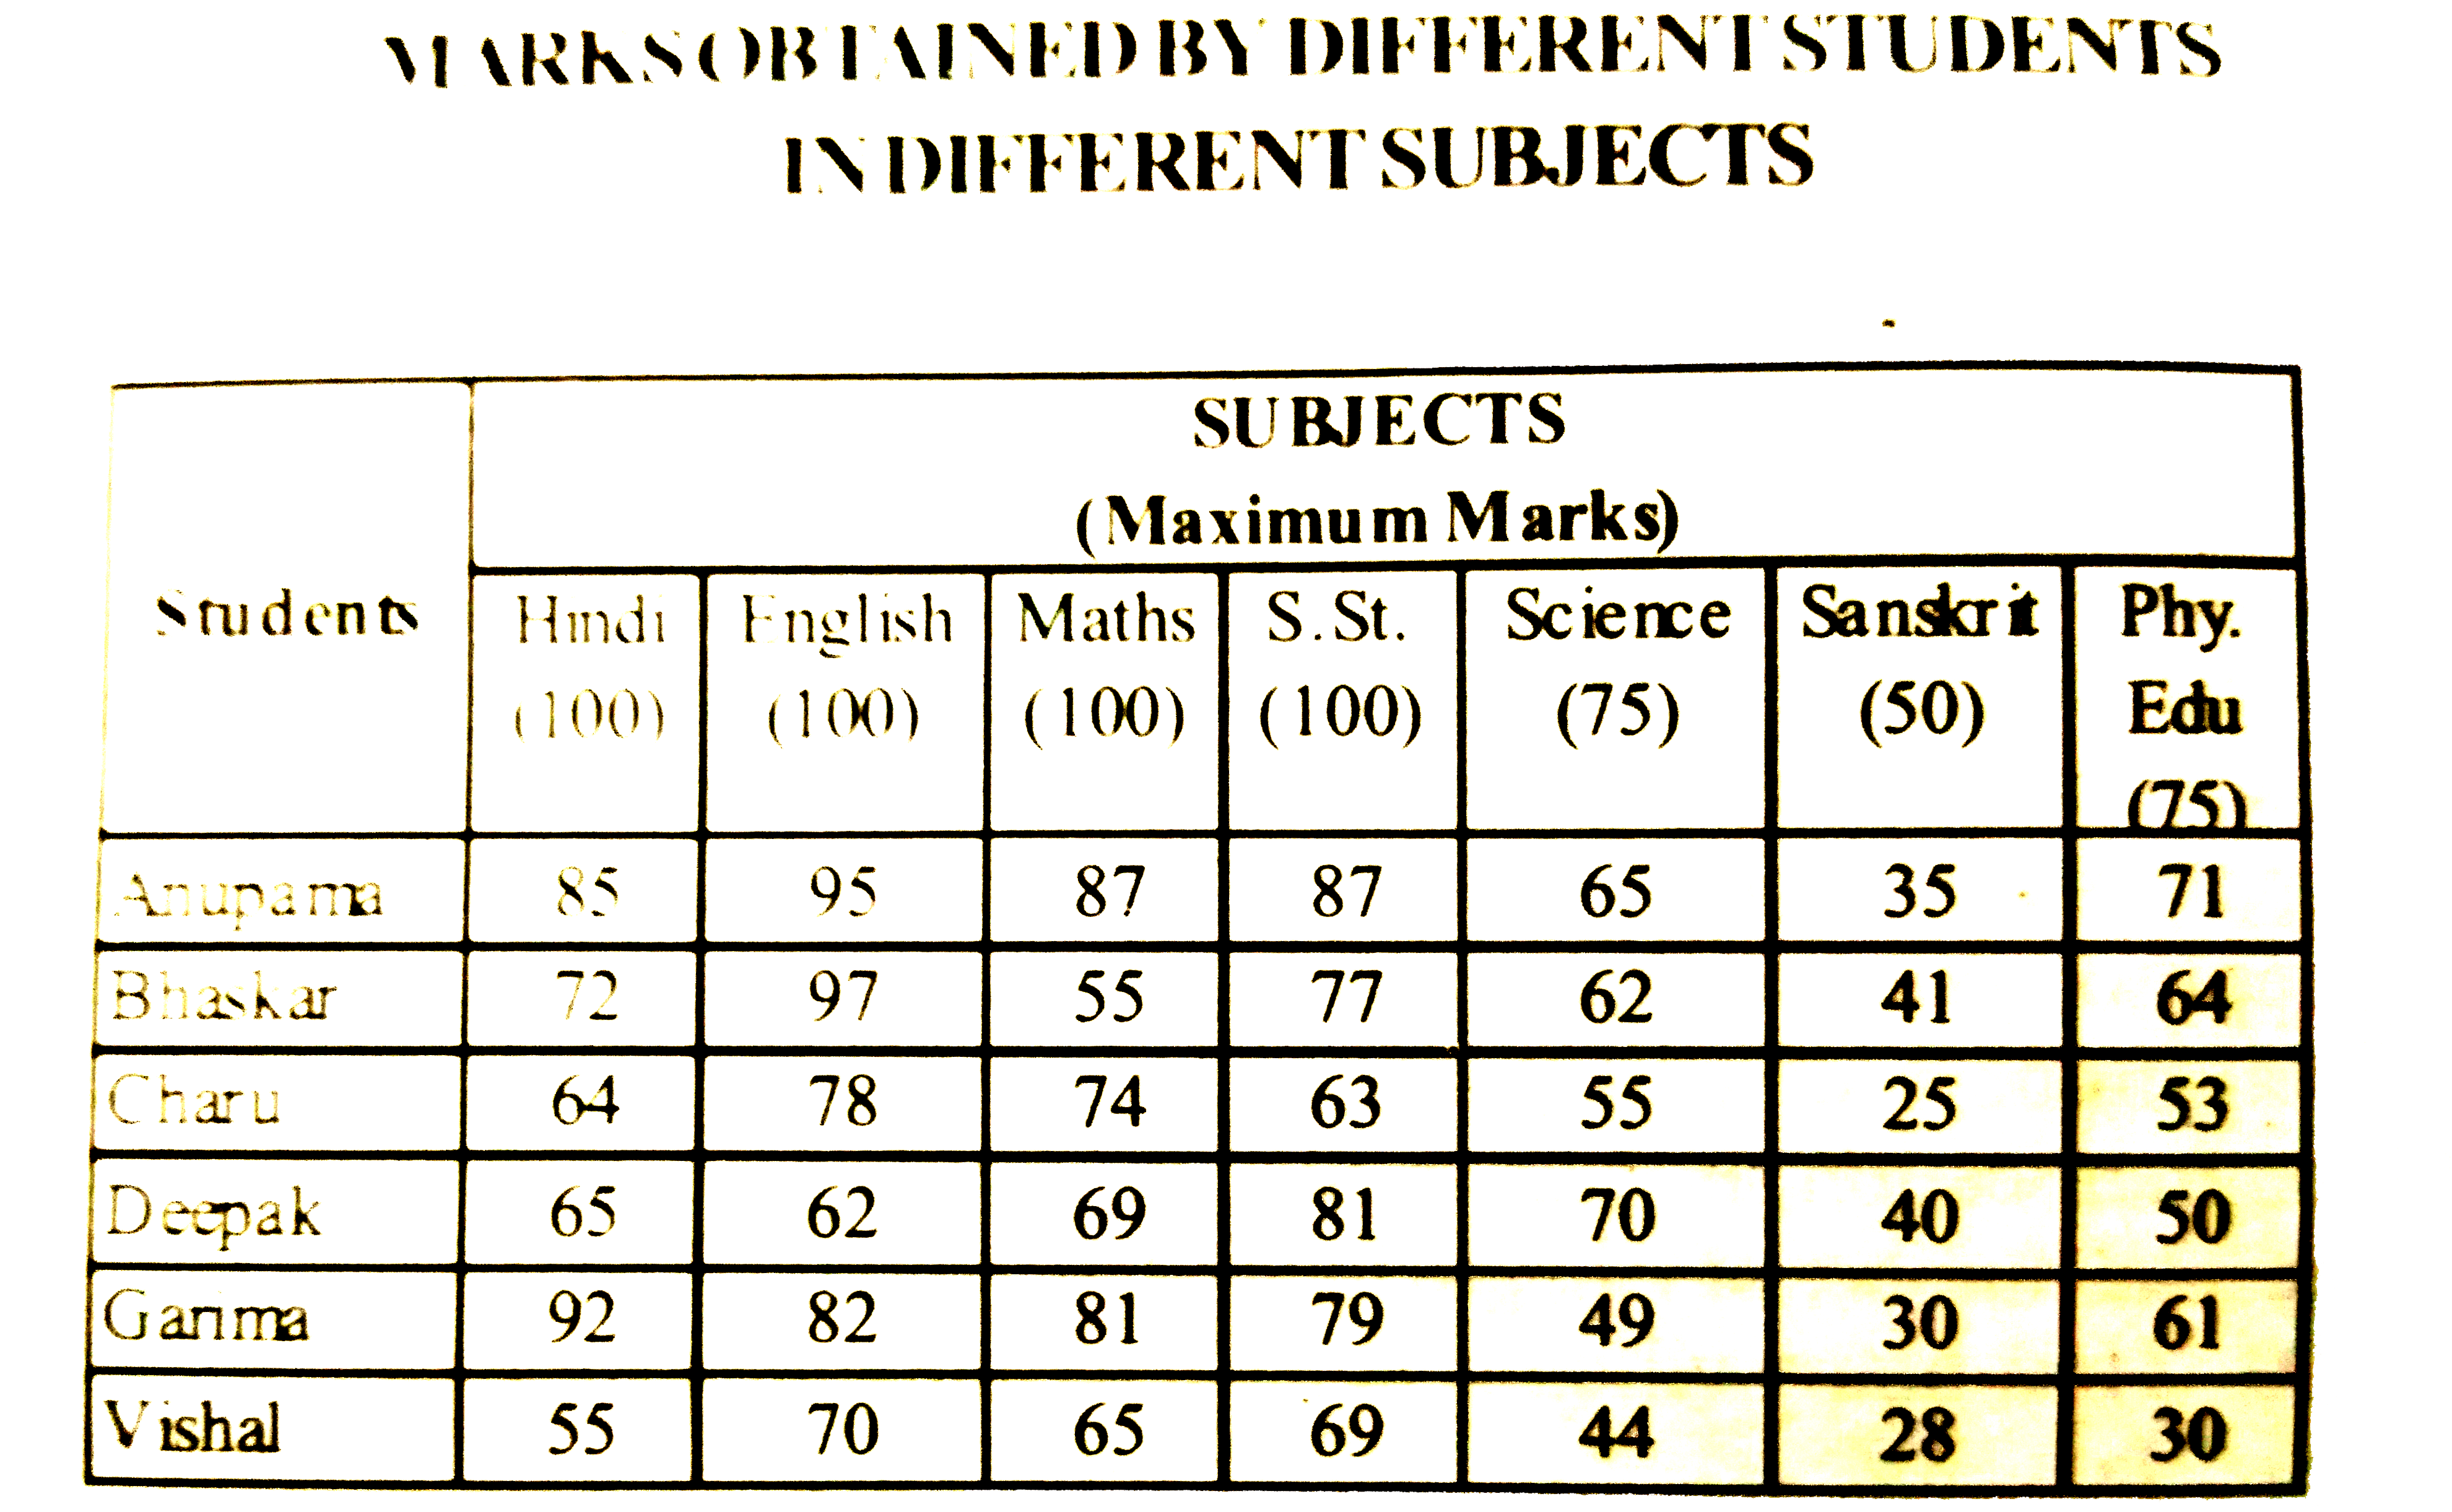 What is the precentage of Deepak's marks (upto two digits after decimal) in all the subjects together ?